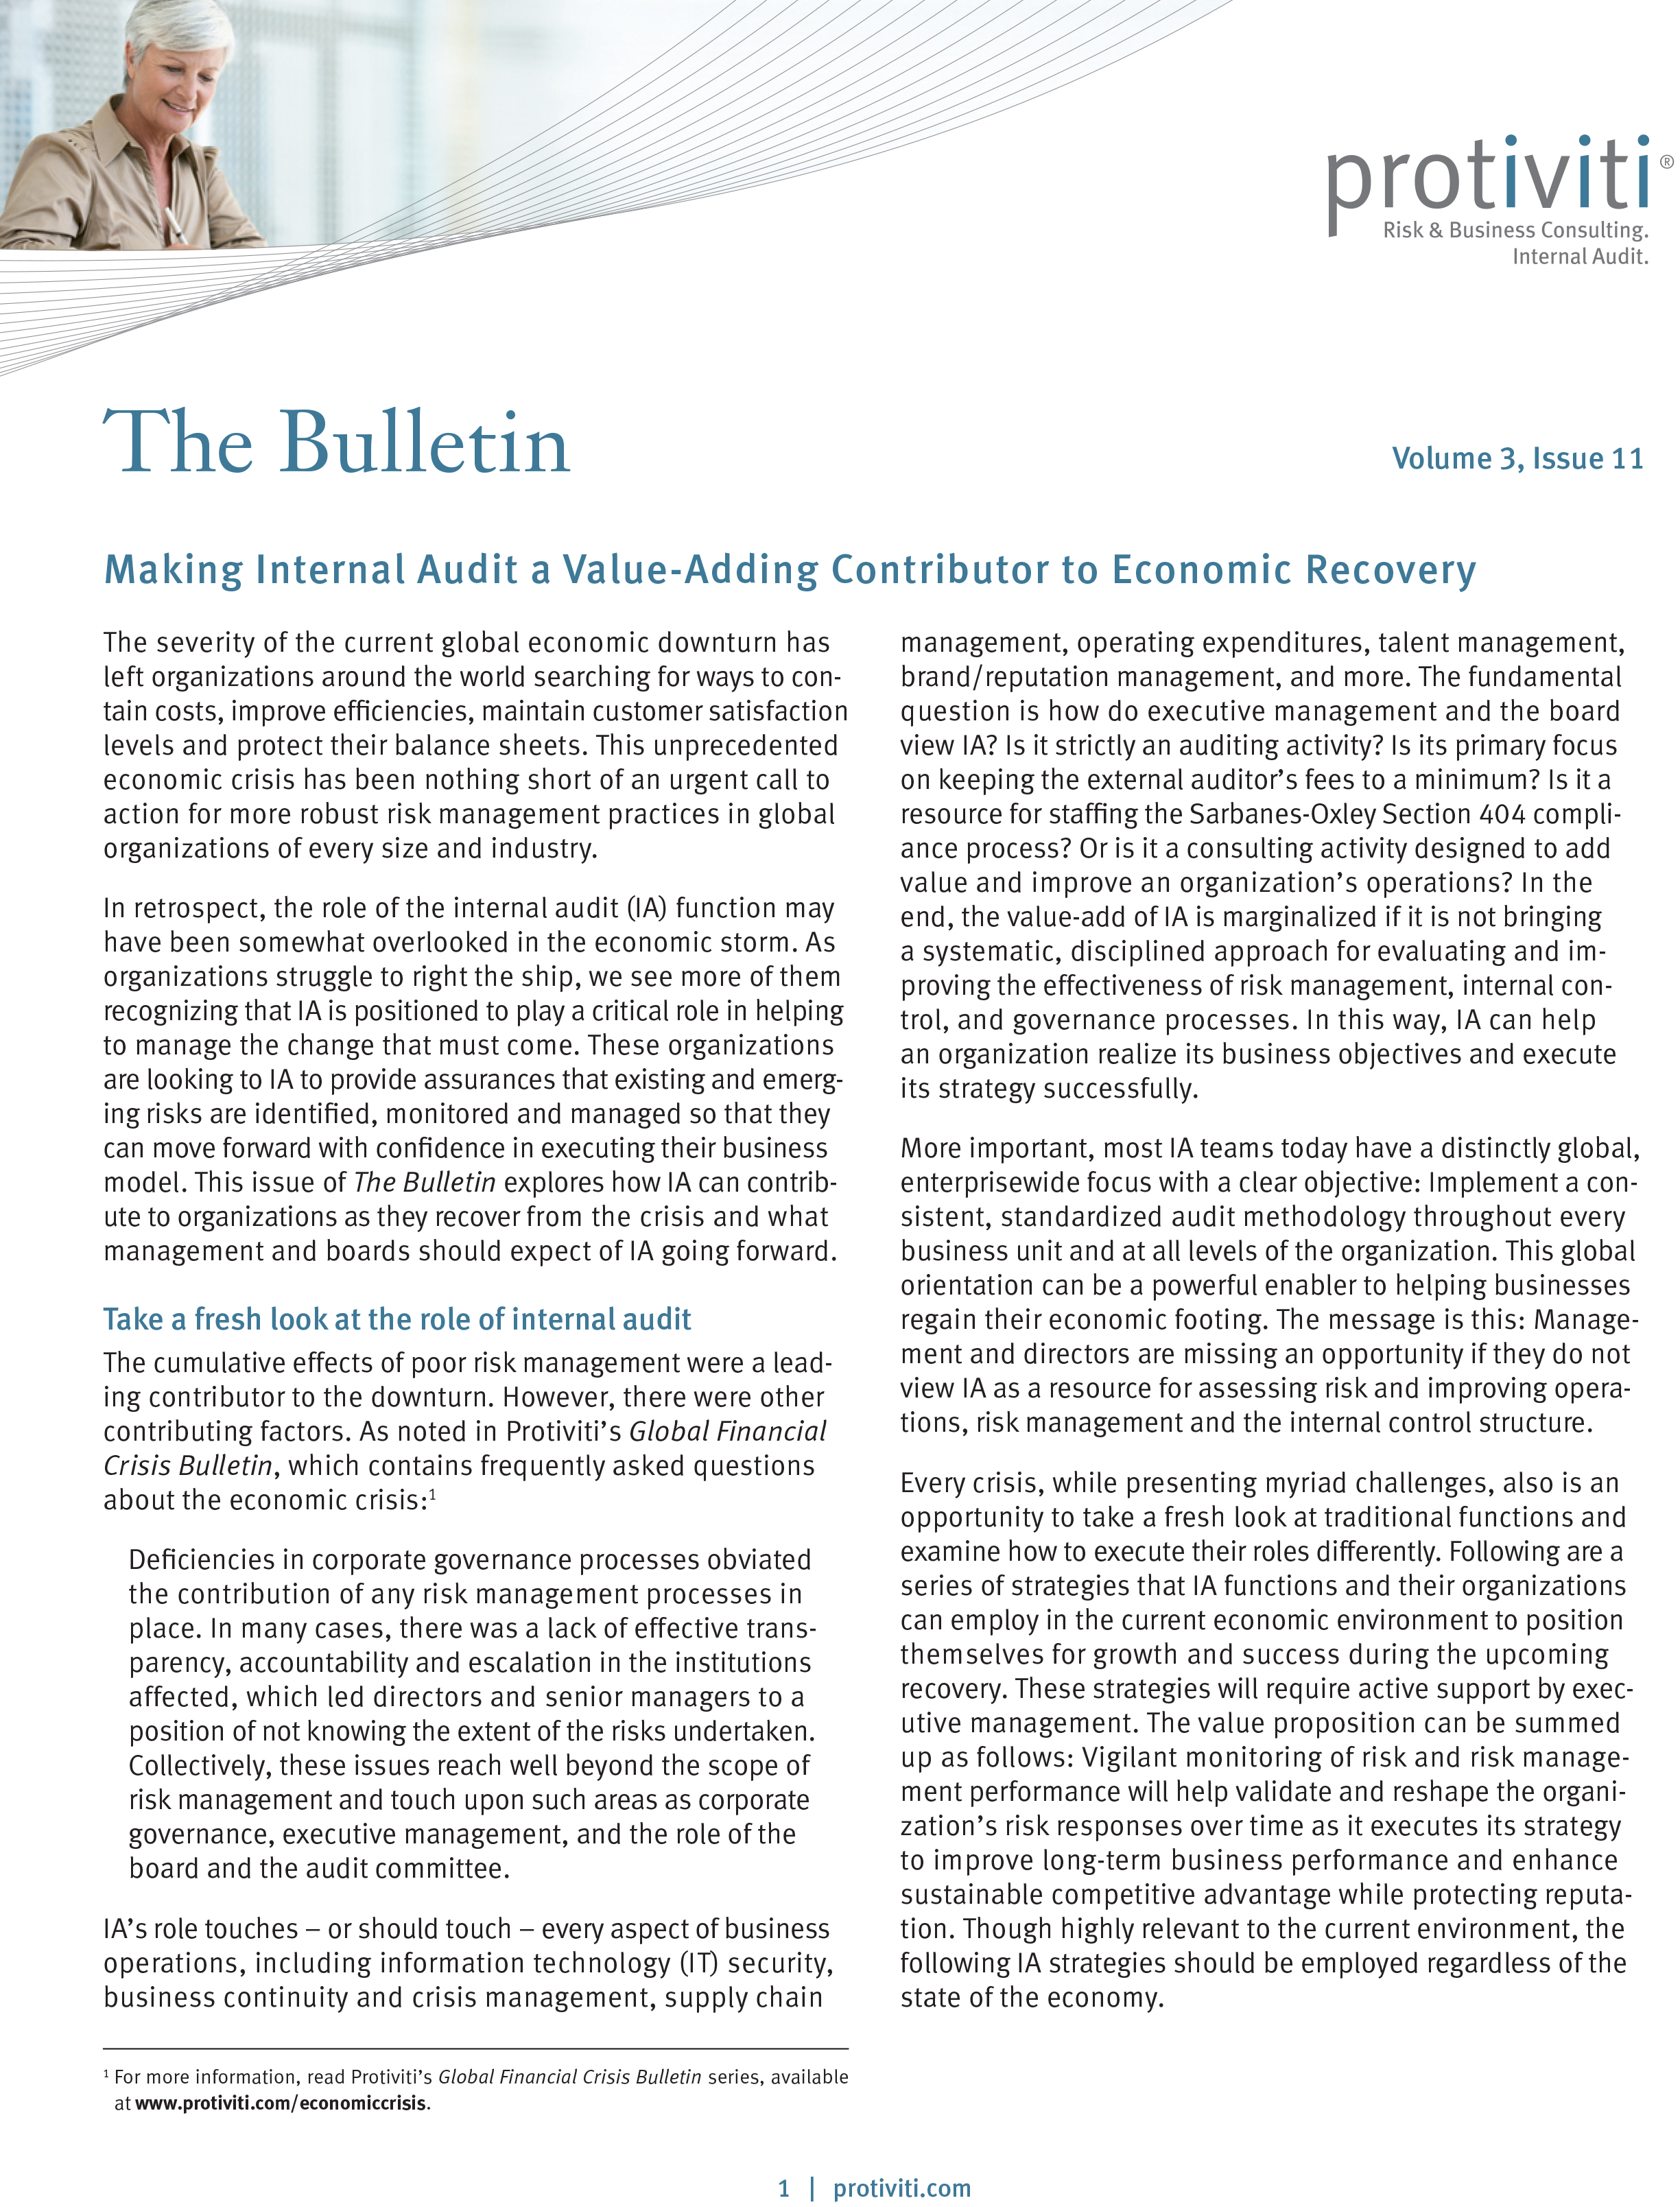 Screenshot of the first page of Making Internal Audit a Value-Adding Contributor to Economic Recovery